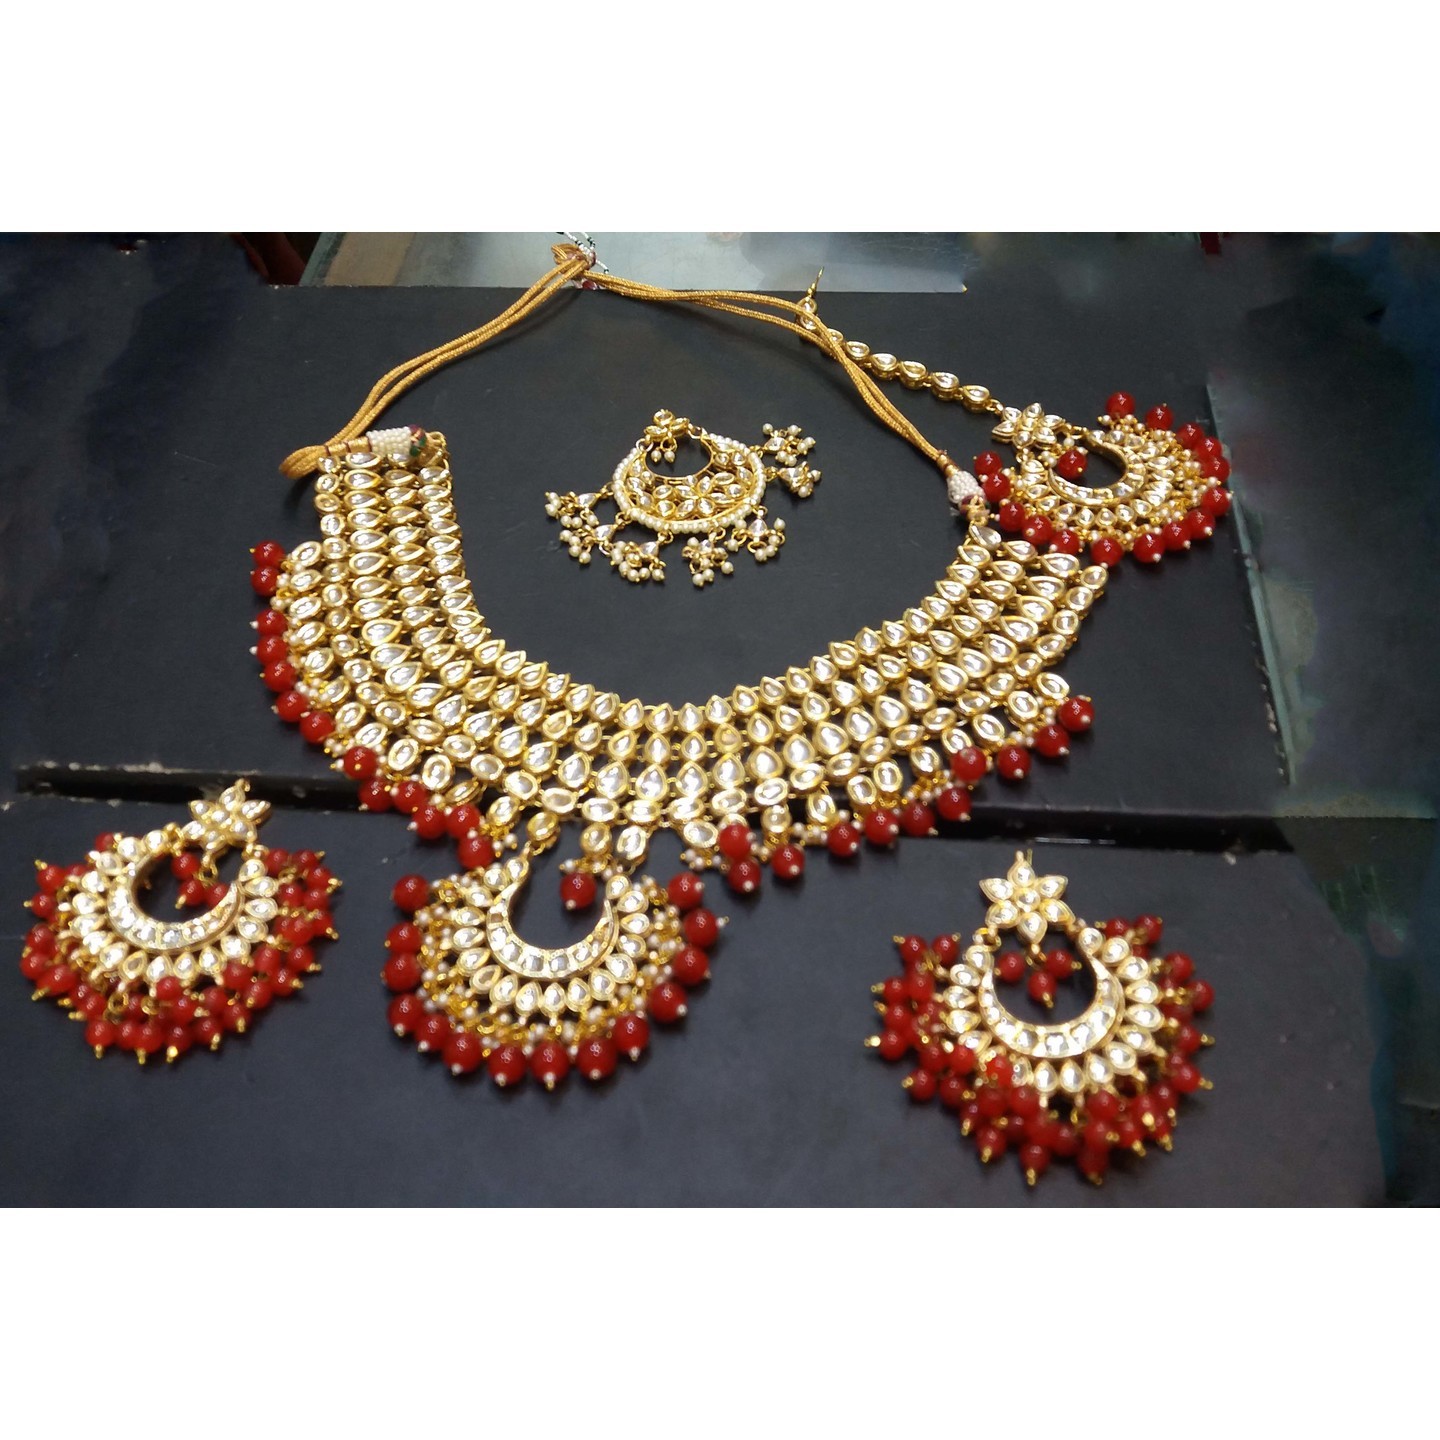 Gold Tone Kundan Necklace Set With Earring Tikka Ruby Red Onyx Pearls